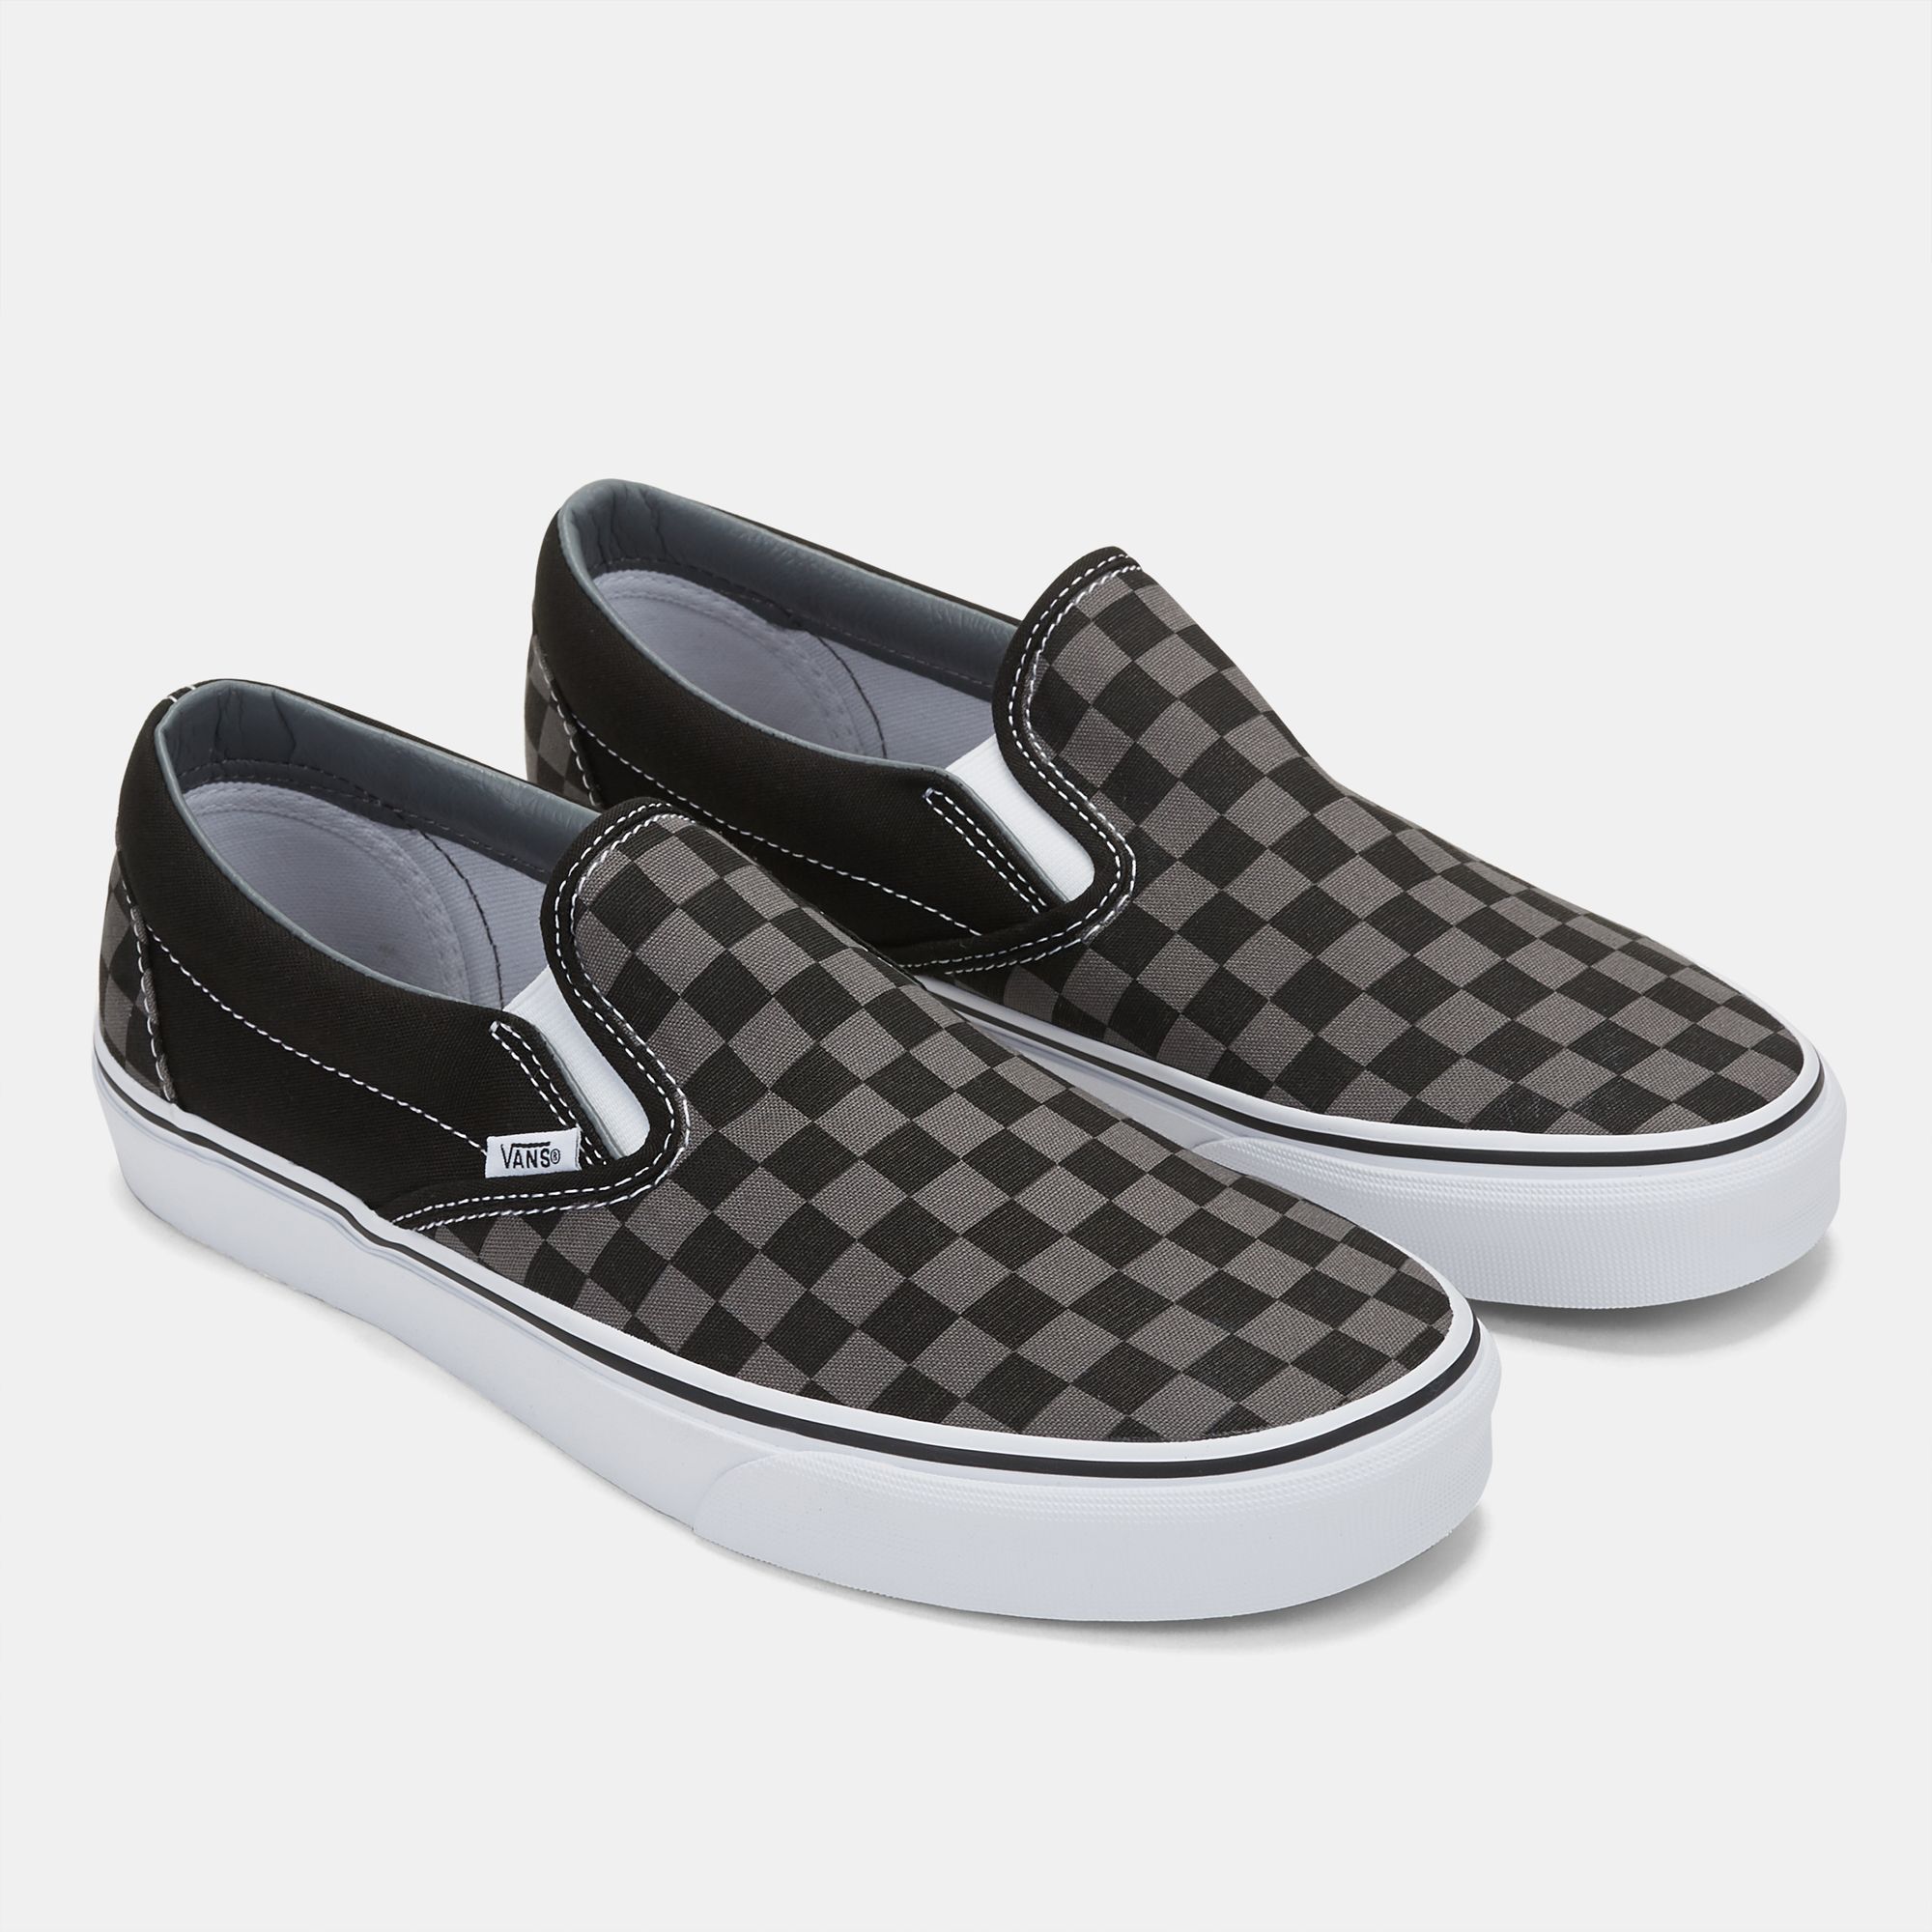 Shop Blue Vans Classic Slip-On Checkerboard Shoe for Unisex by Vans | SSS